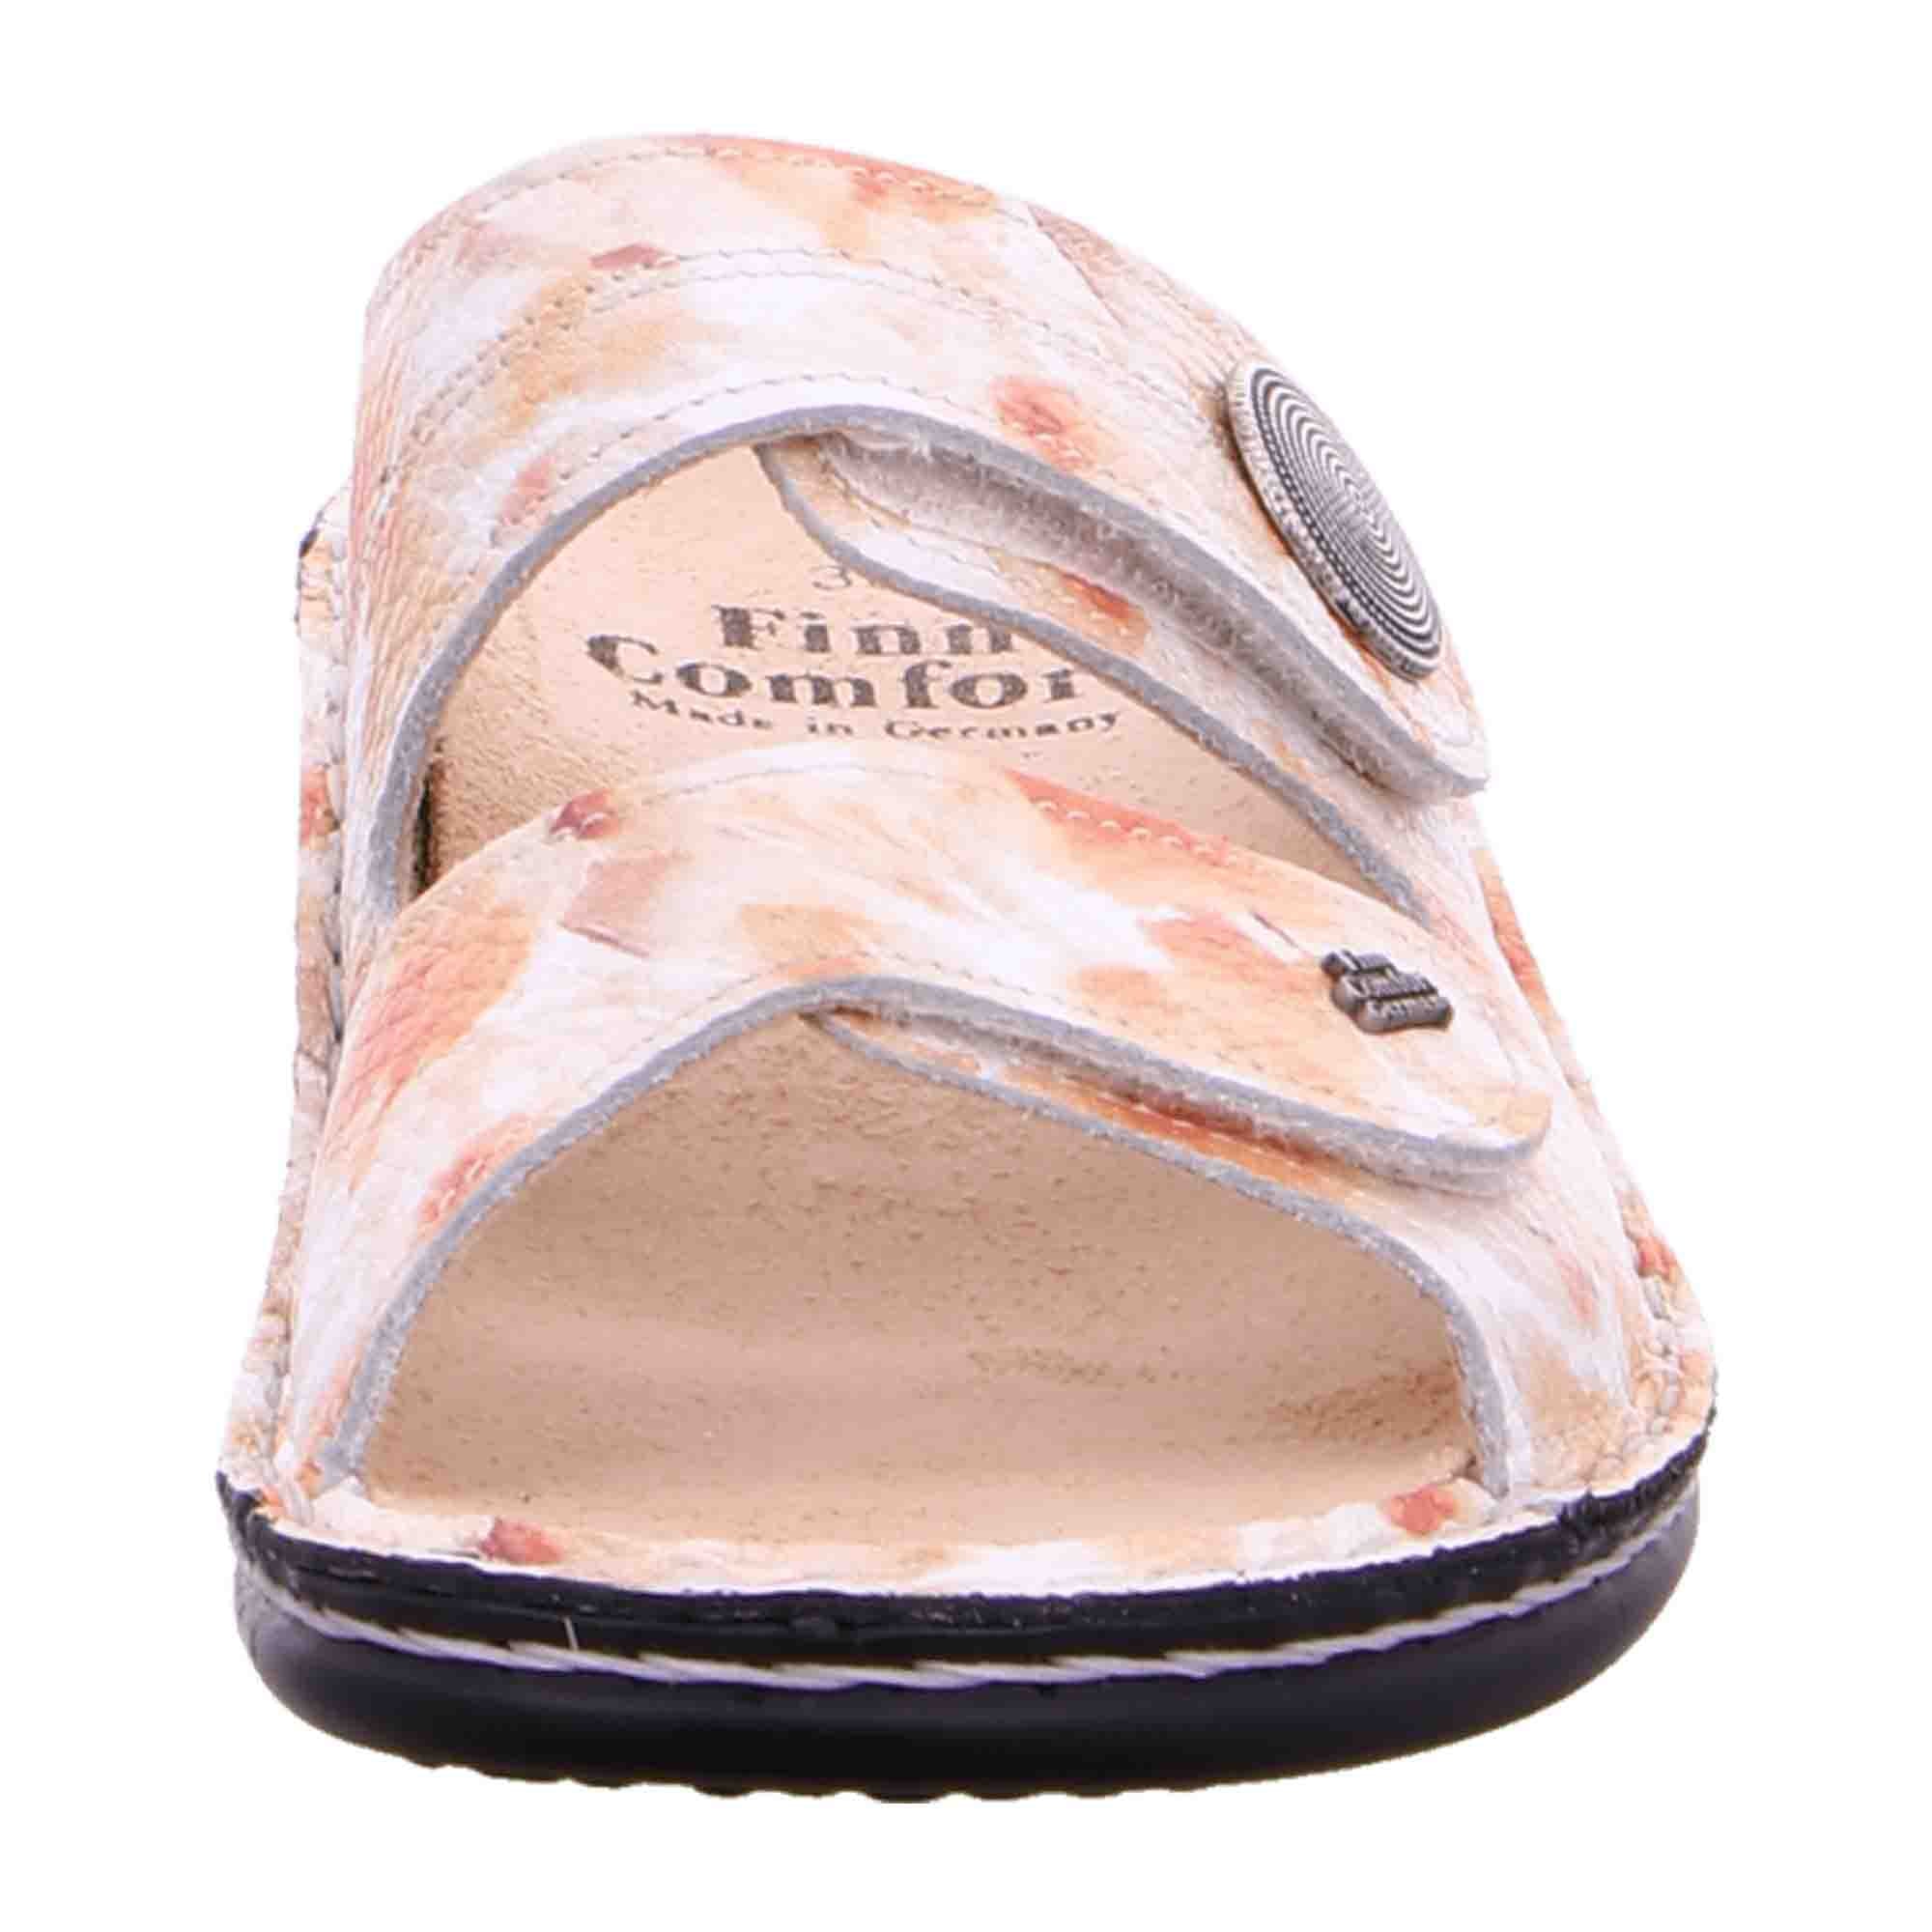 Finn Comfort Sansibar Peach Women's Sandals - Multicolor Leather Slides with Adjustable Straps and Removable Insoles